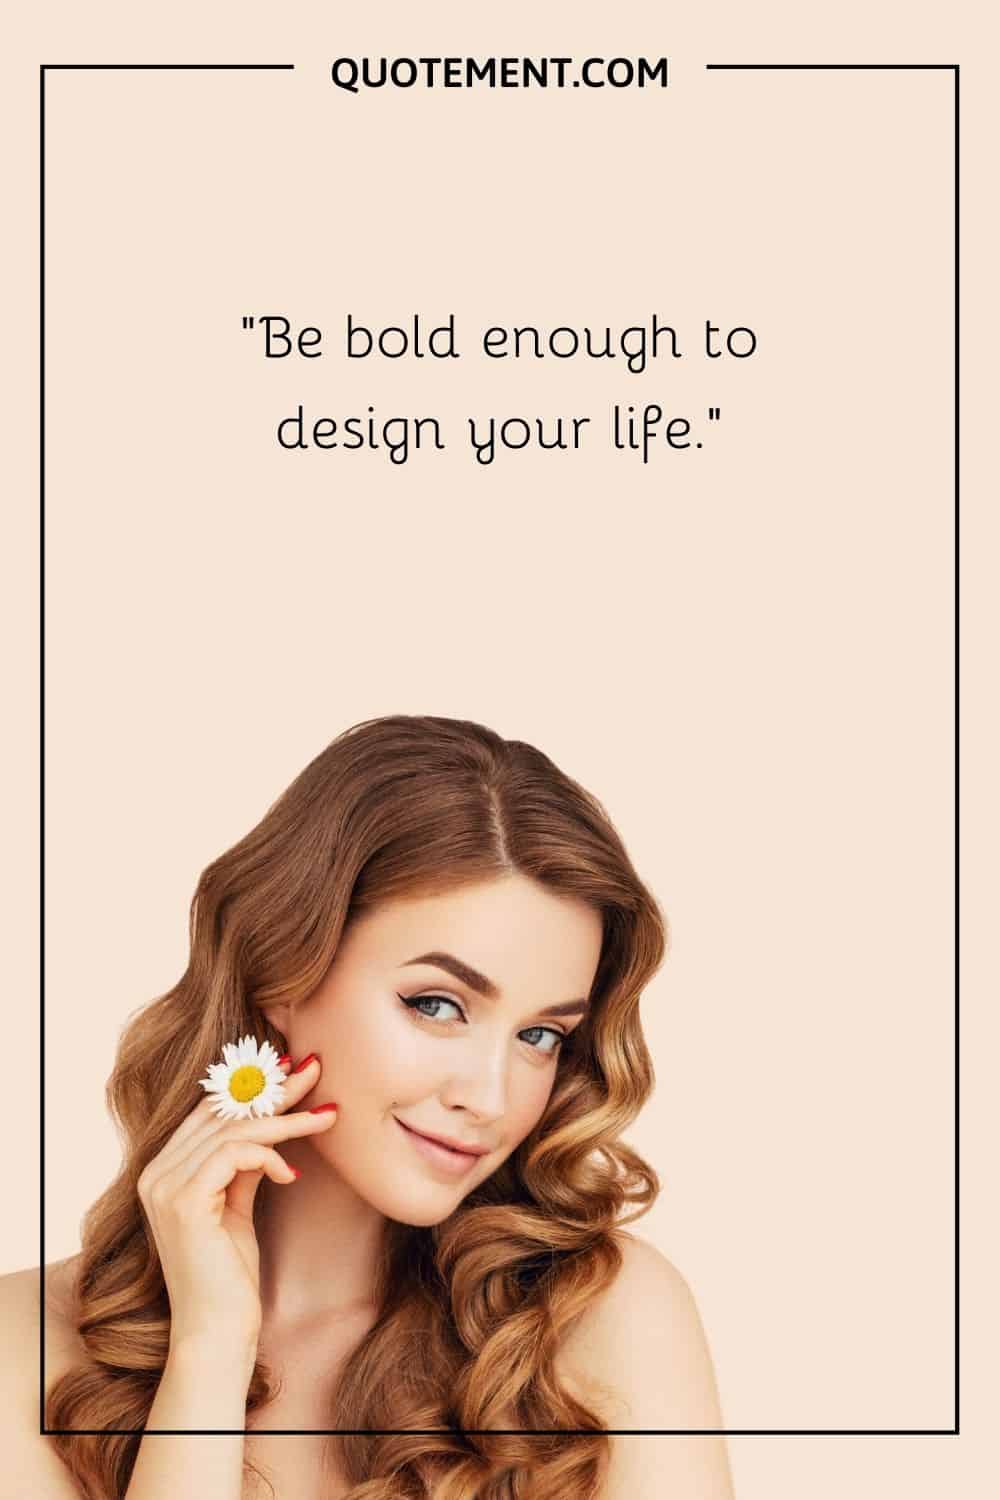 Be bold enough to design your life